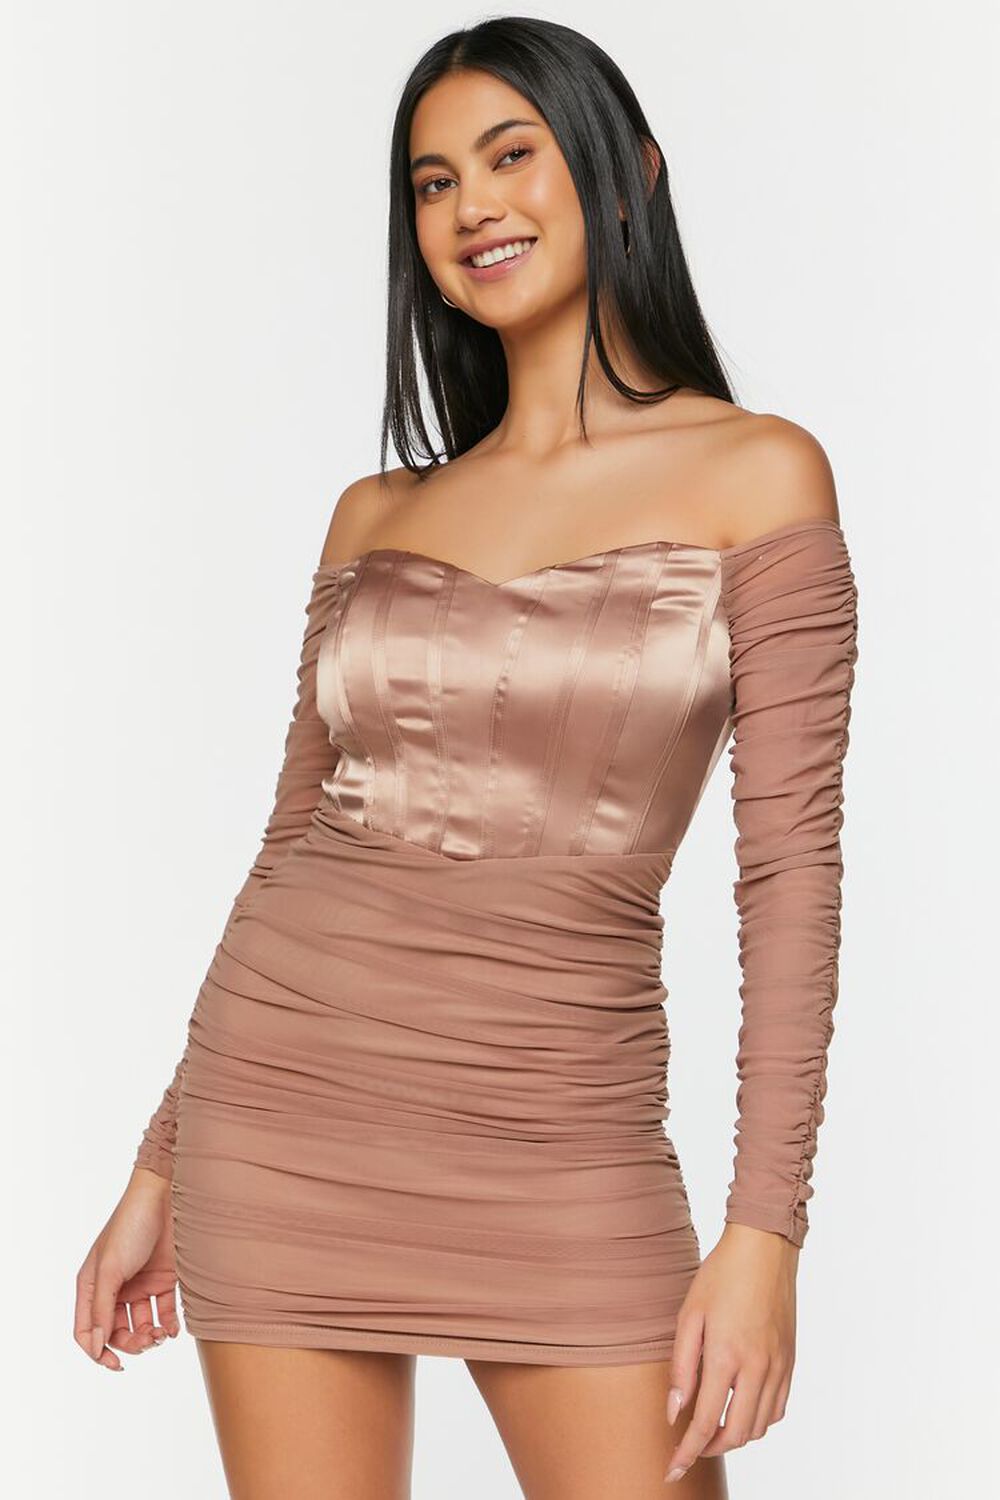 CAPPUCCINO Ruched Mesh Off-the-Shoulder Mini Dress, image 1